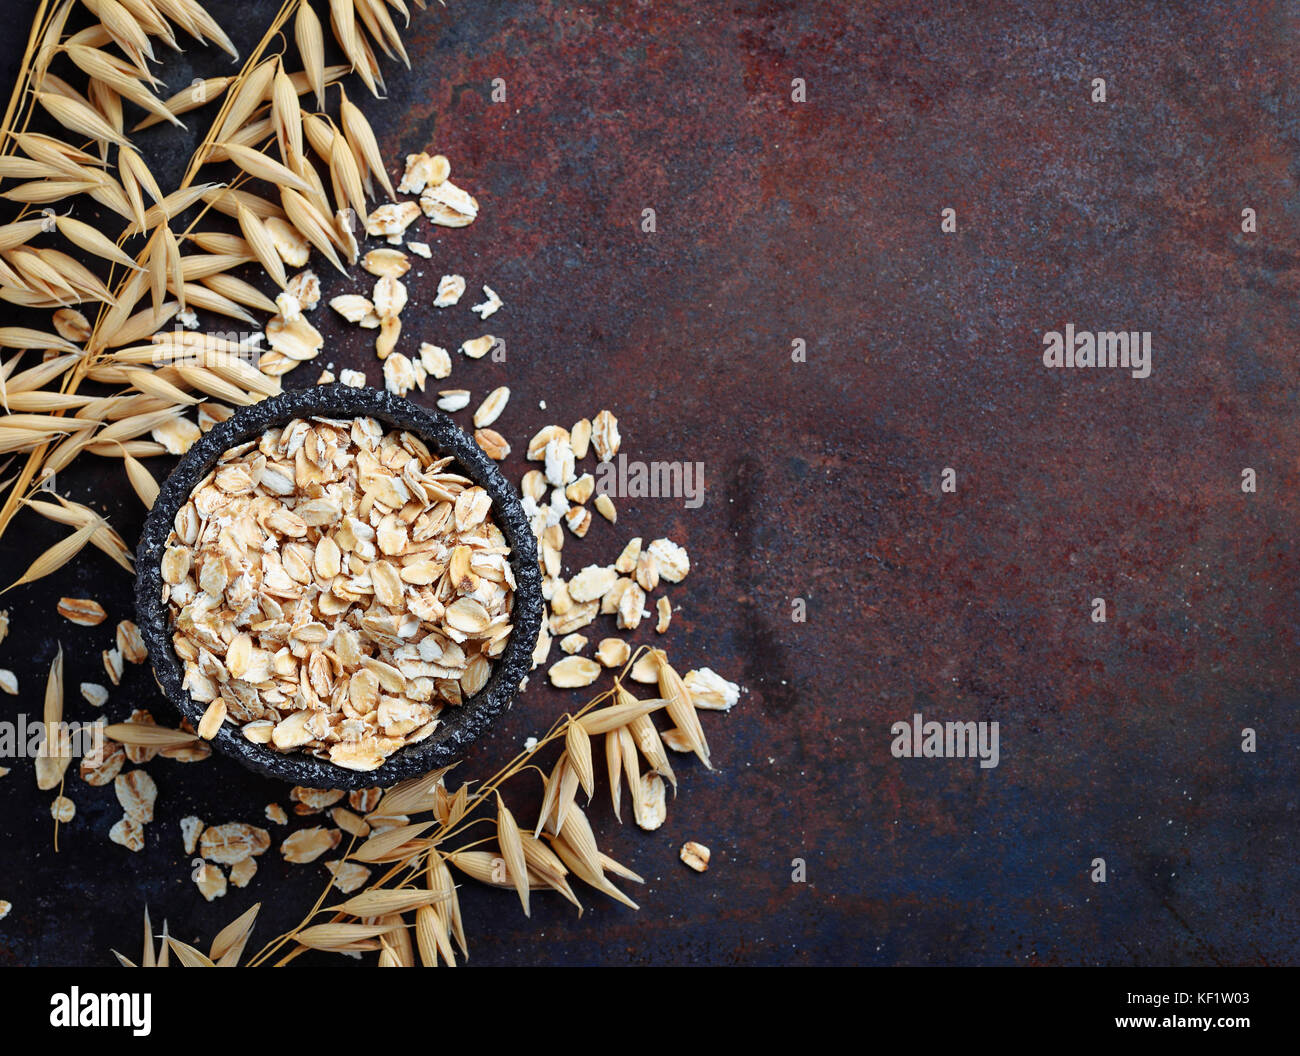 Oat flakes and spikelets on rusty background Stock Photo